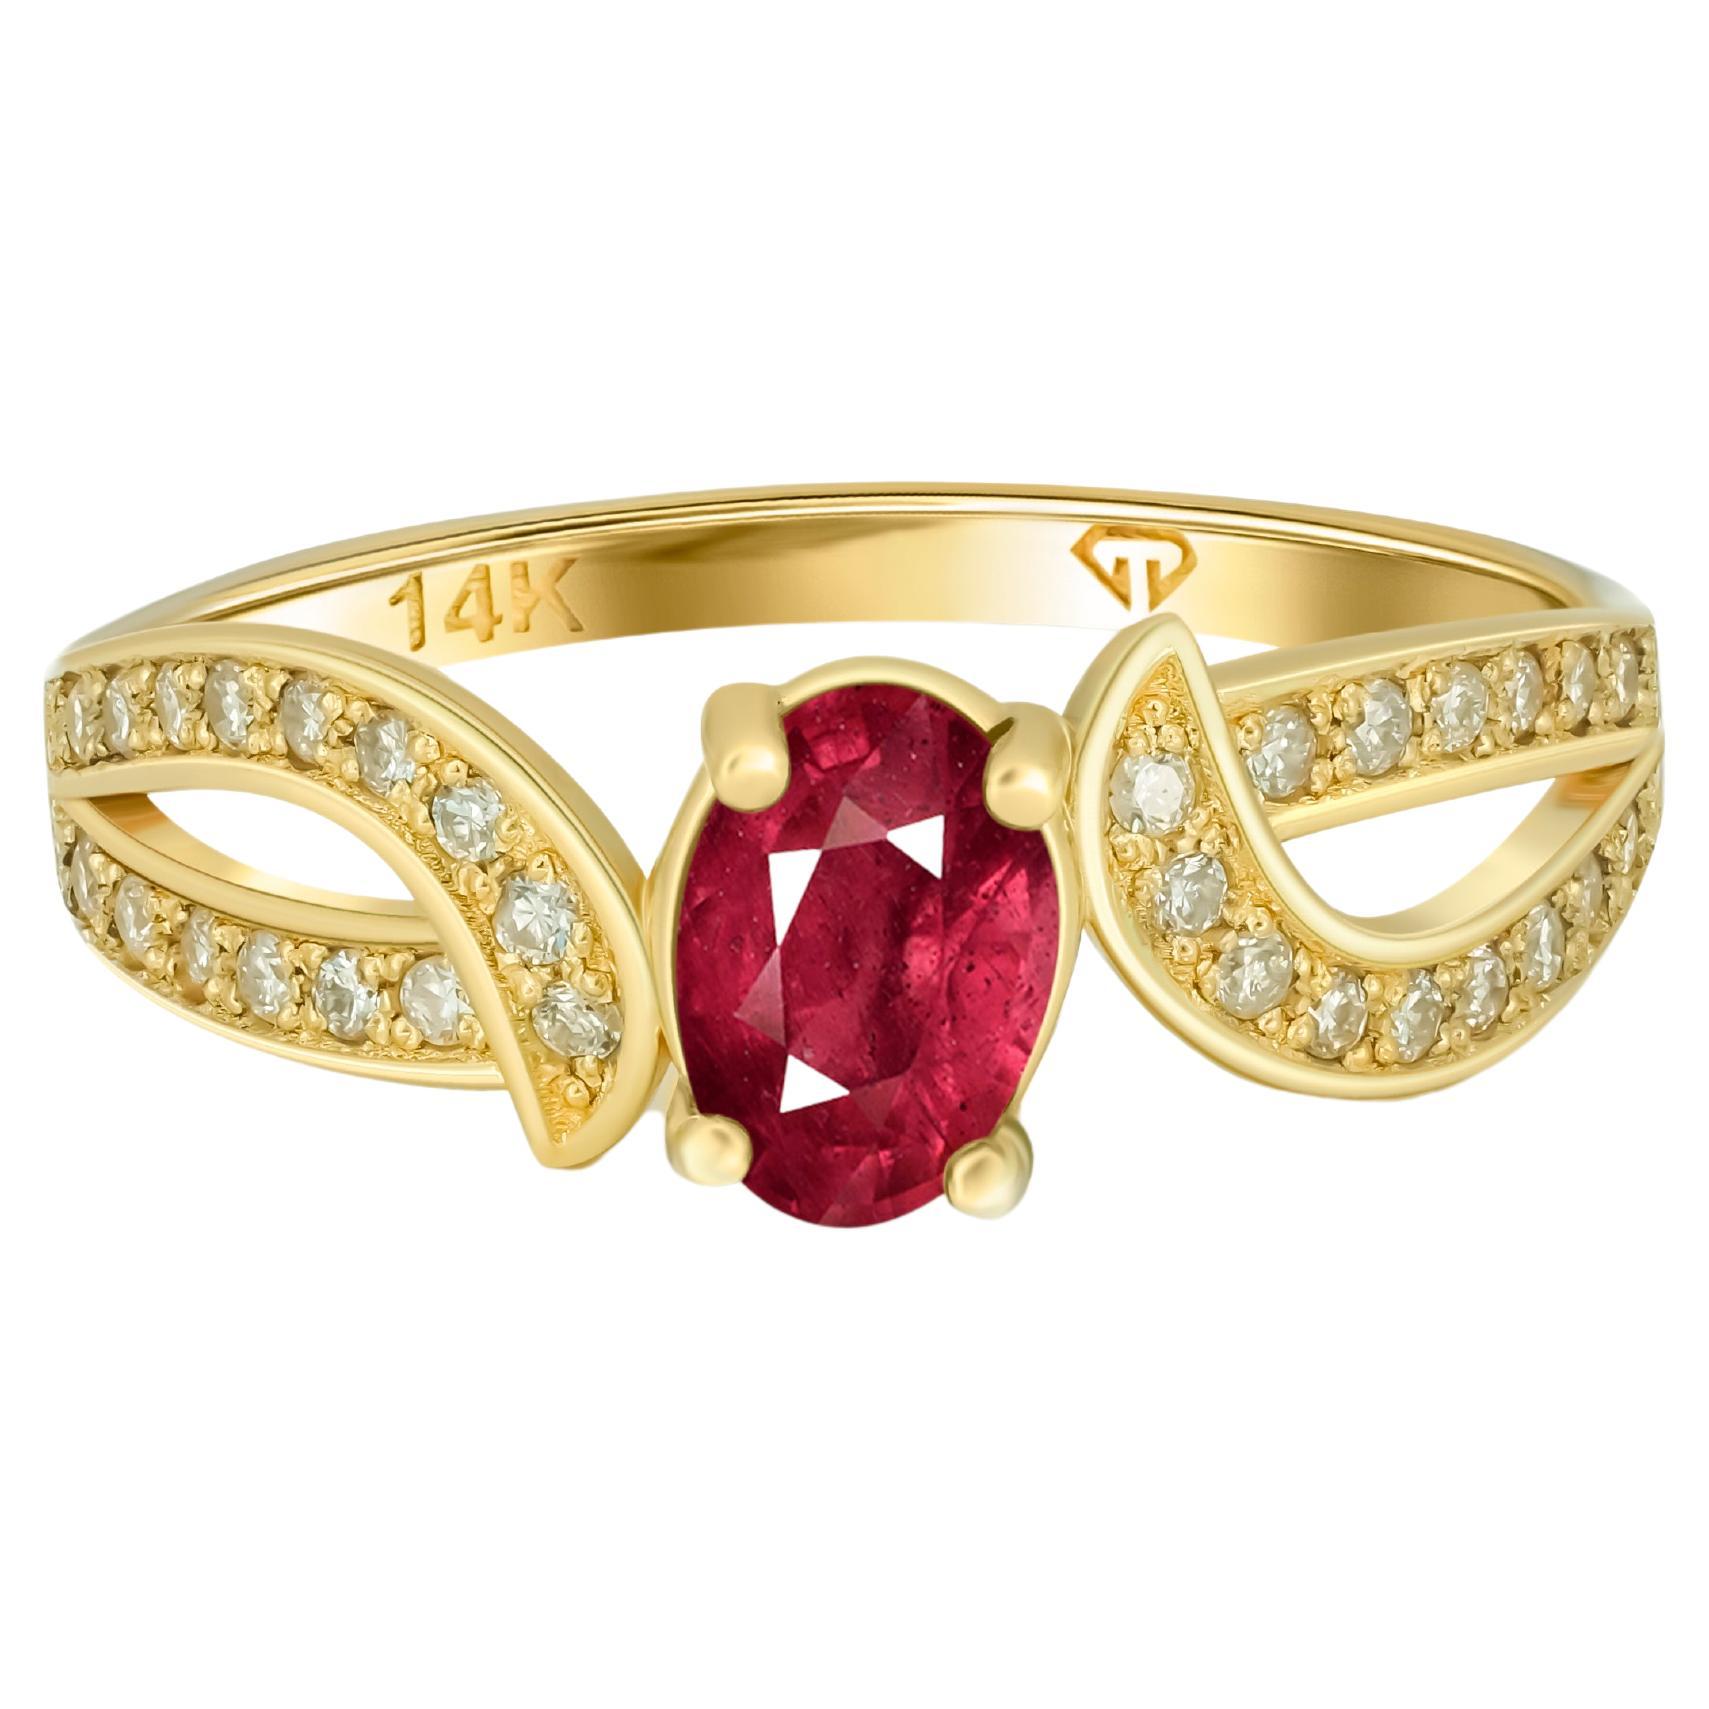 For Sale:  Genuine Ruby 14k Gold Ring, Ruby Engagement Ring